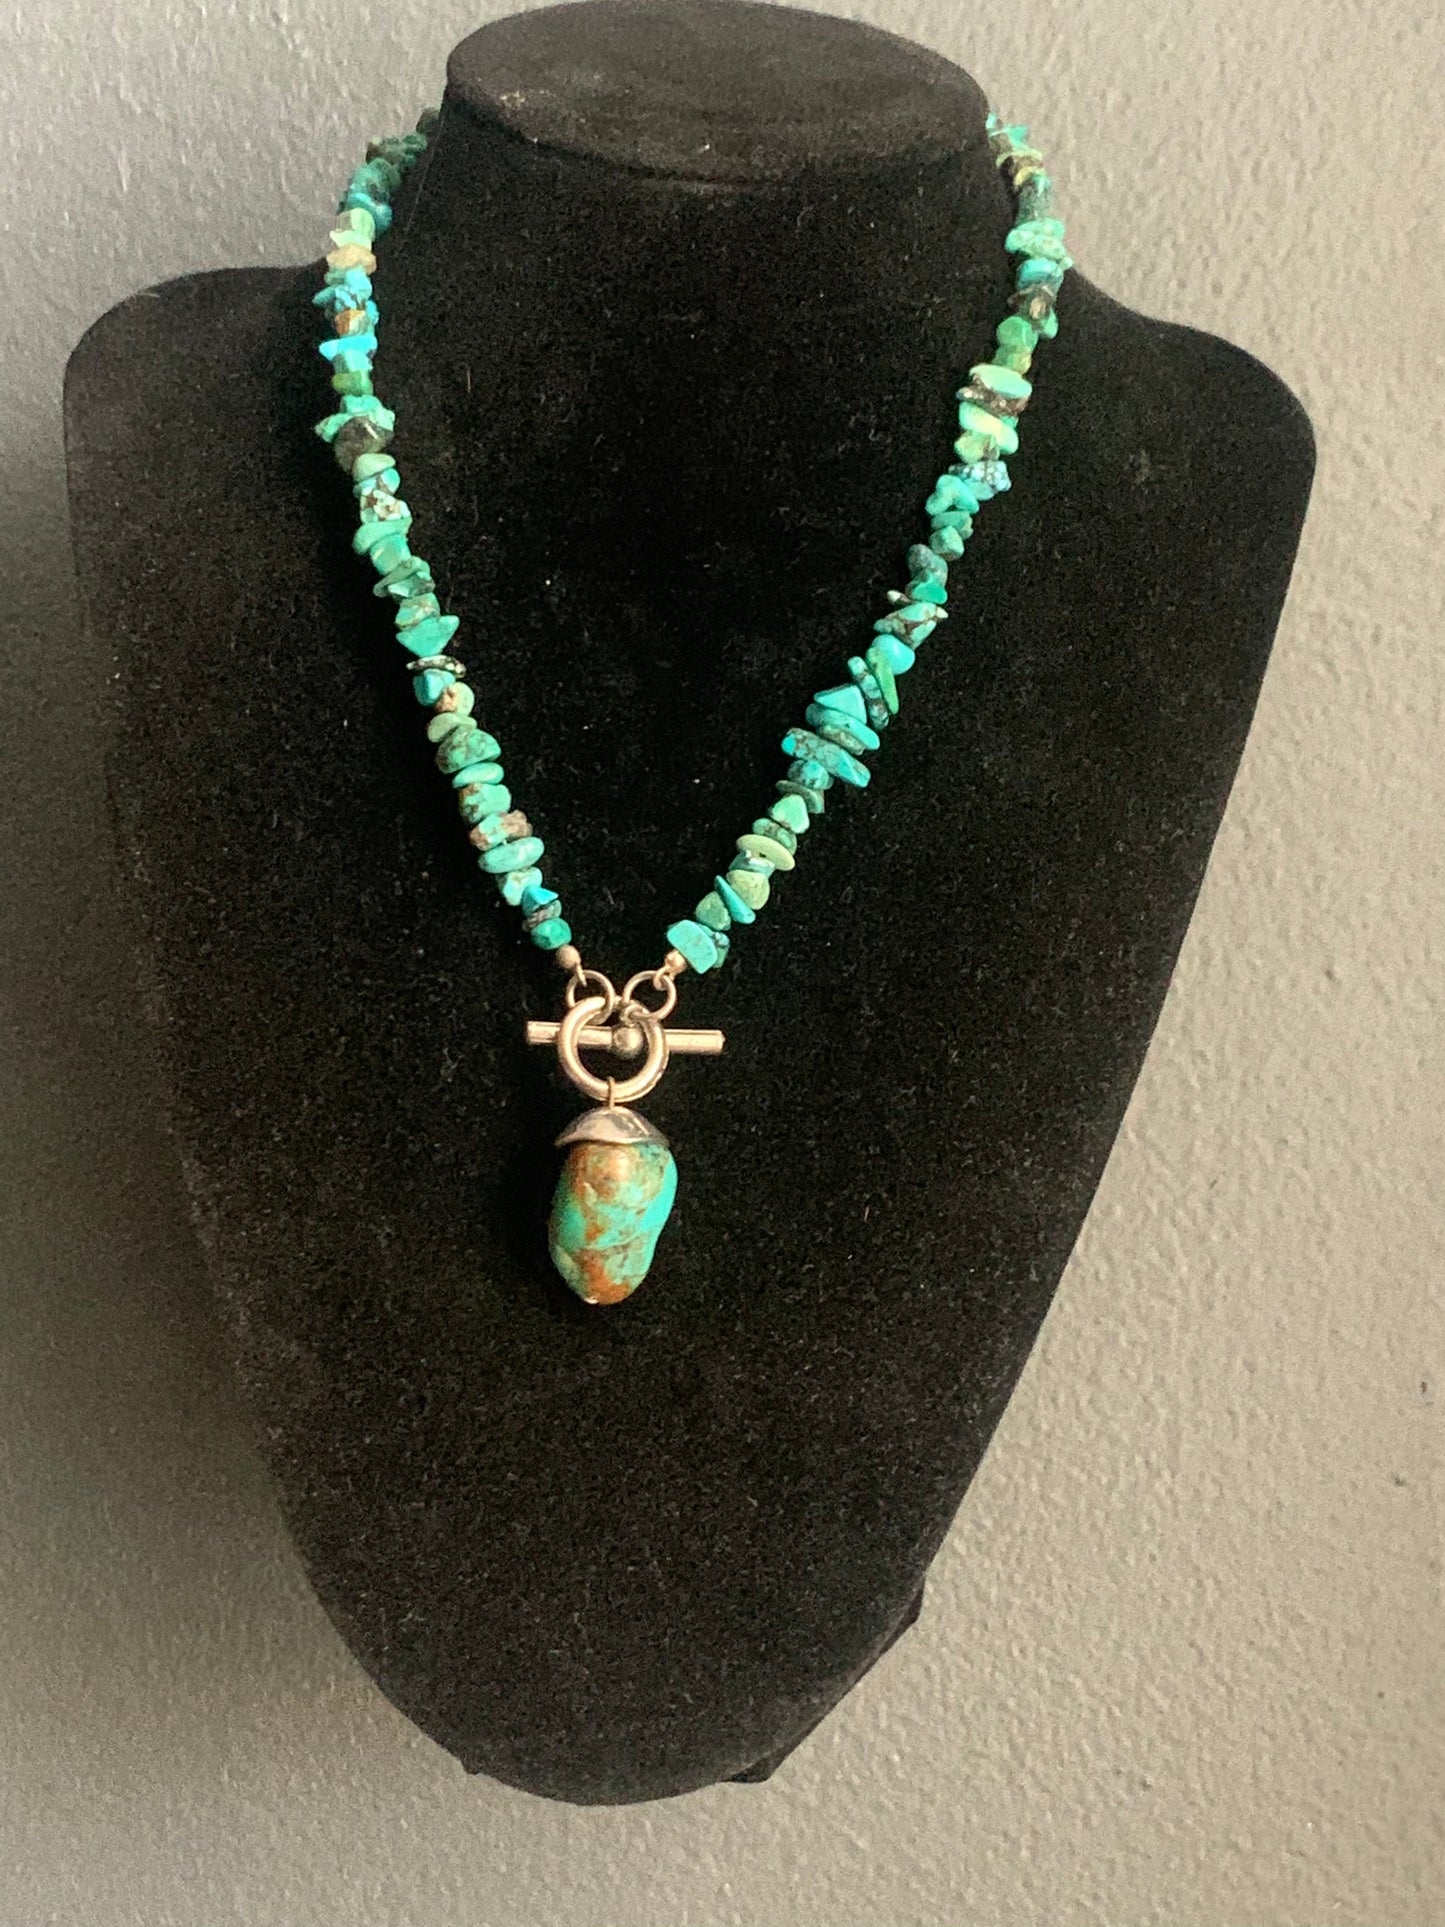 A turquoise necklace and pendant